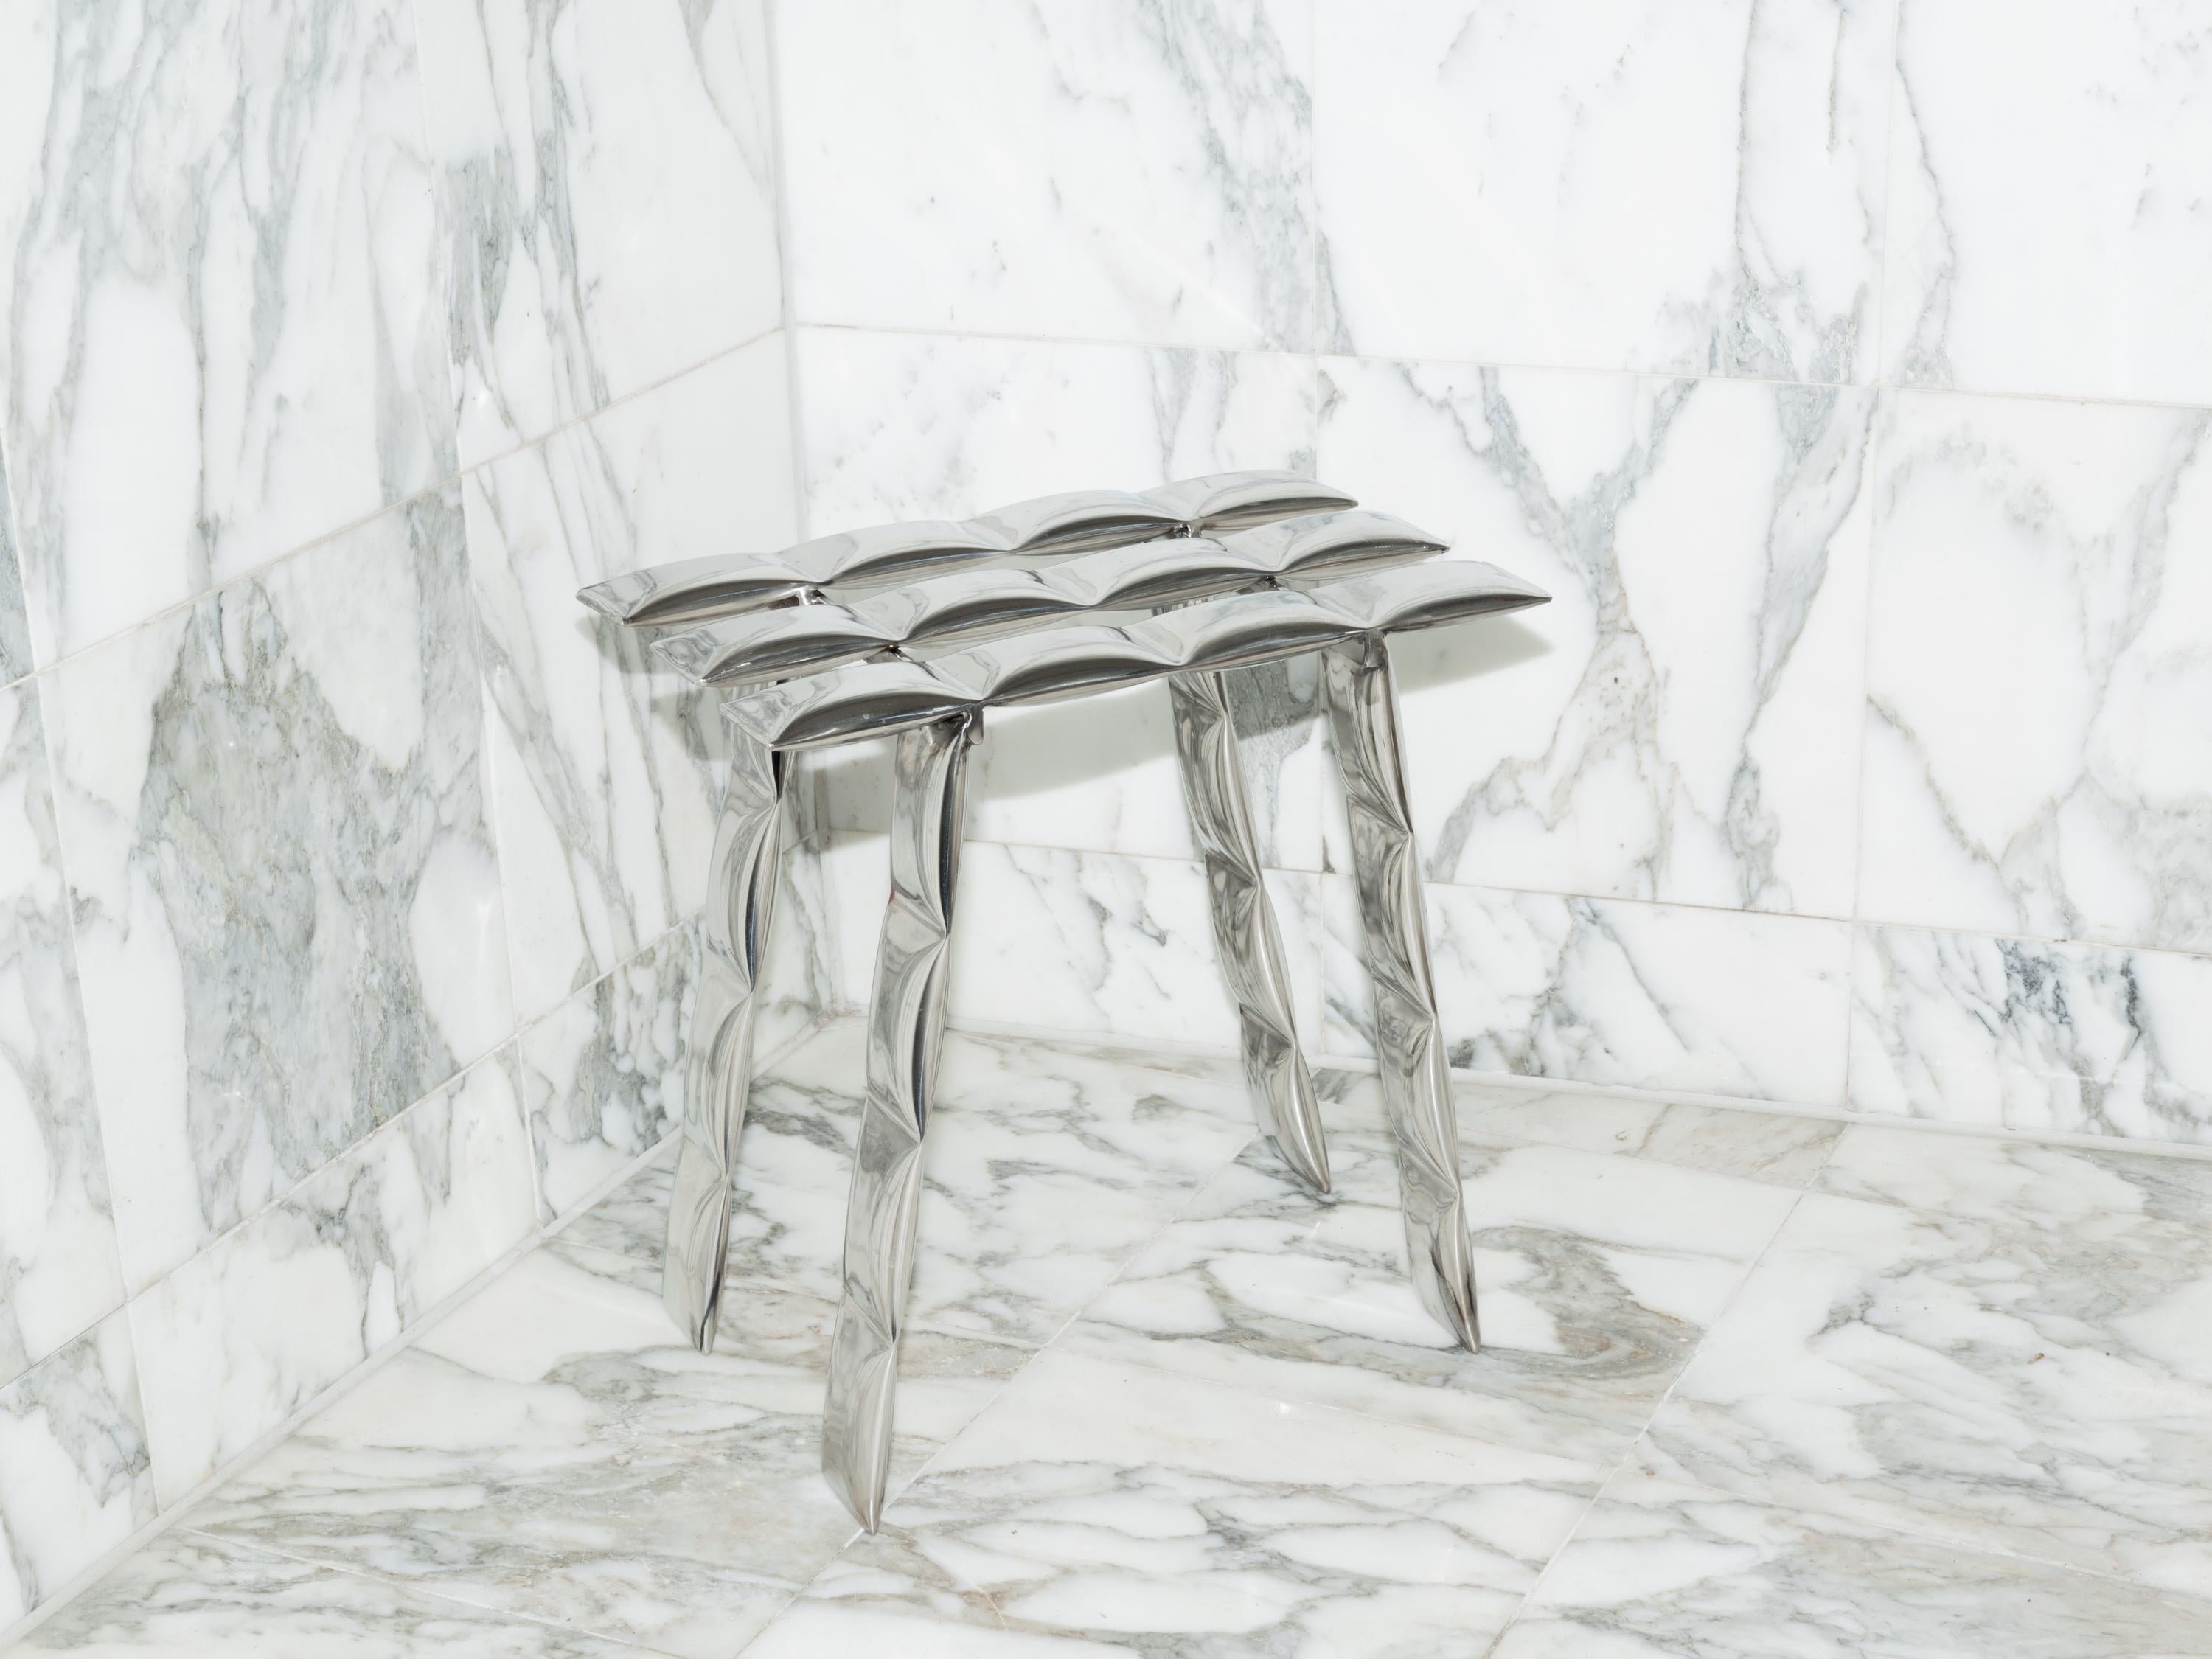 
Stainless Steel Cosmic Stool by  Mati Sipiora
Dimensions: D 35 x W 40 x H 40 cm
Materials: Stainless Steel. 
Finish: Polished Stainless Steel.
Weight: 5.5 Kg.
Max User Weight: 100 KG


Mati Sipiora – the creator's story and a new Polish design